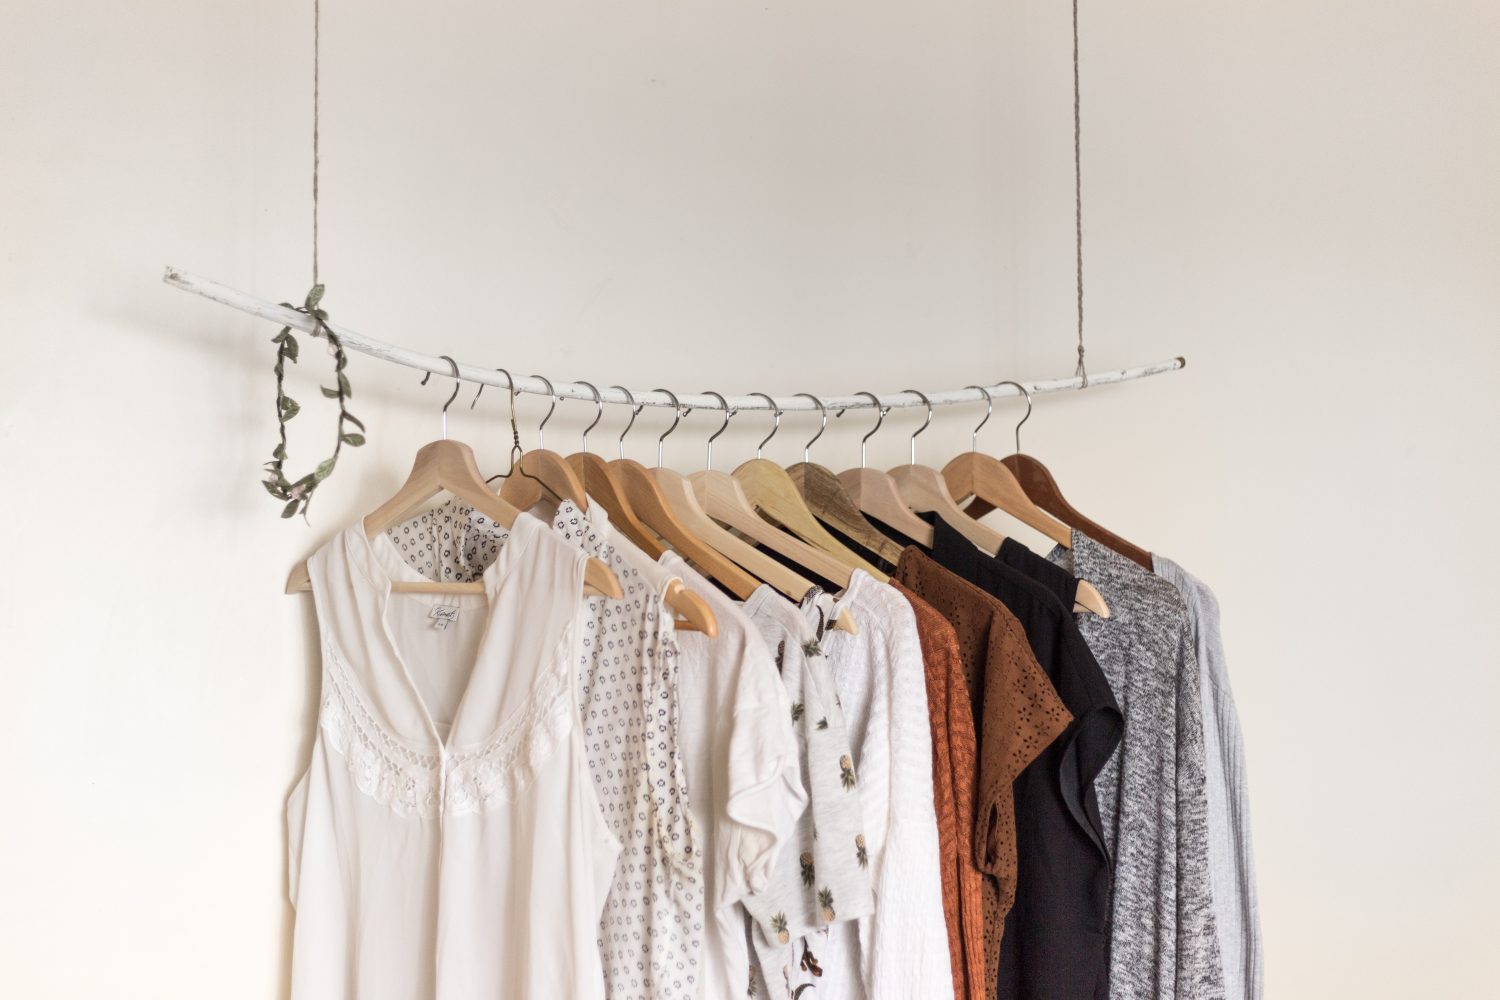 6 Steps to Organize ANY Space